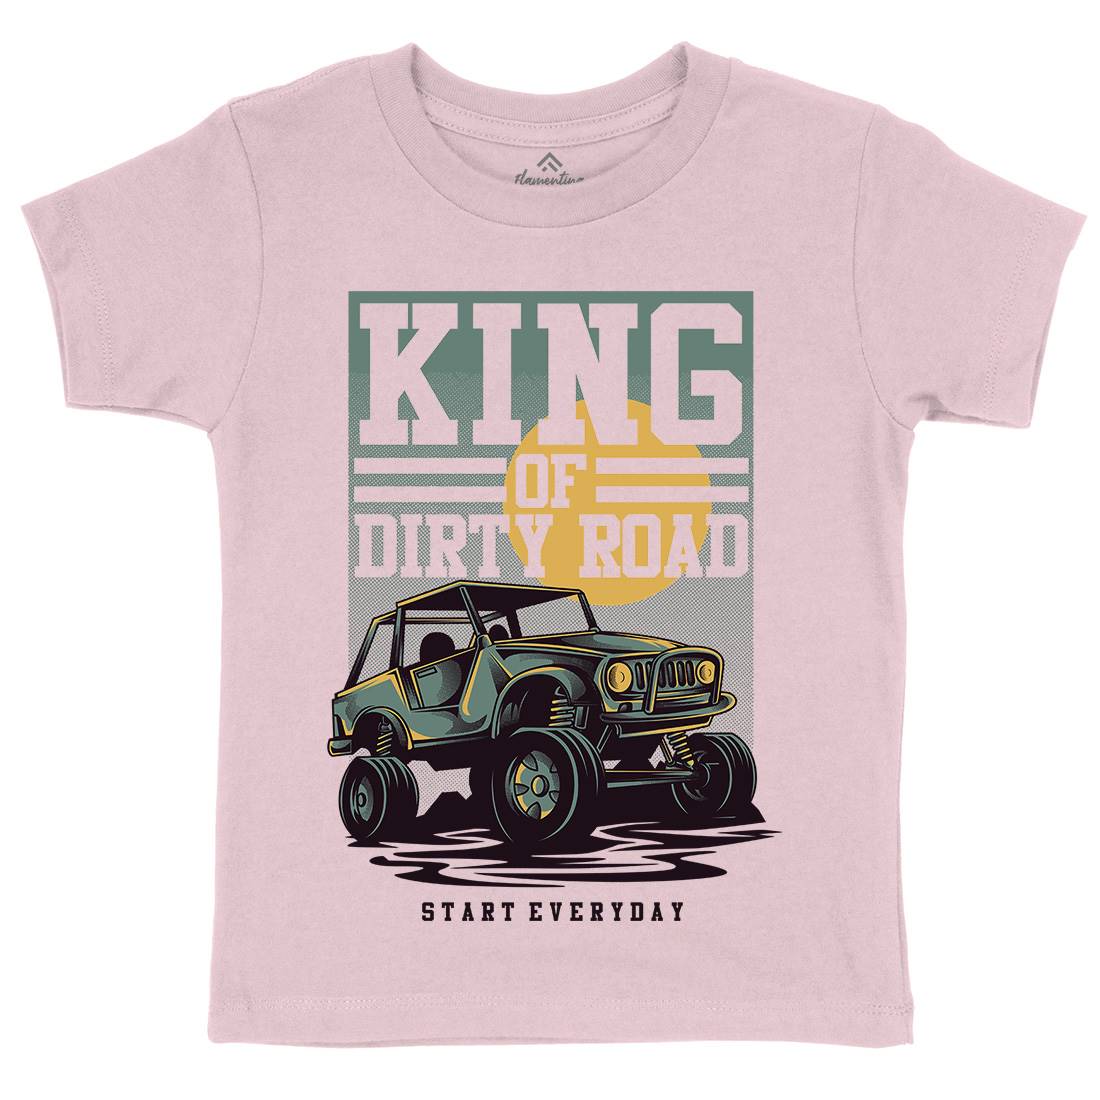 King Of Dirty Road Kids Crew Neck T-Shirt Cars D631